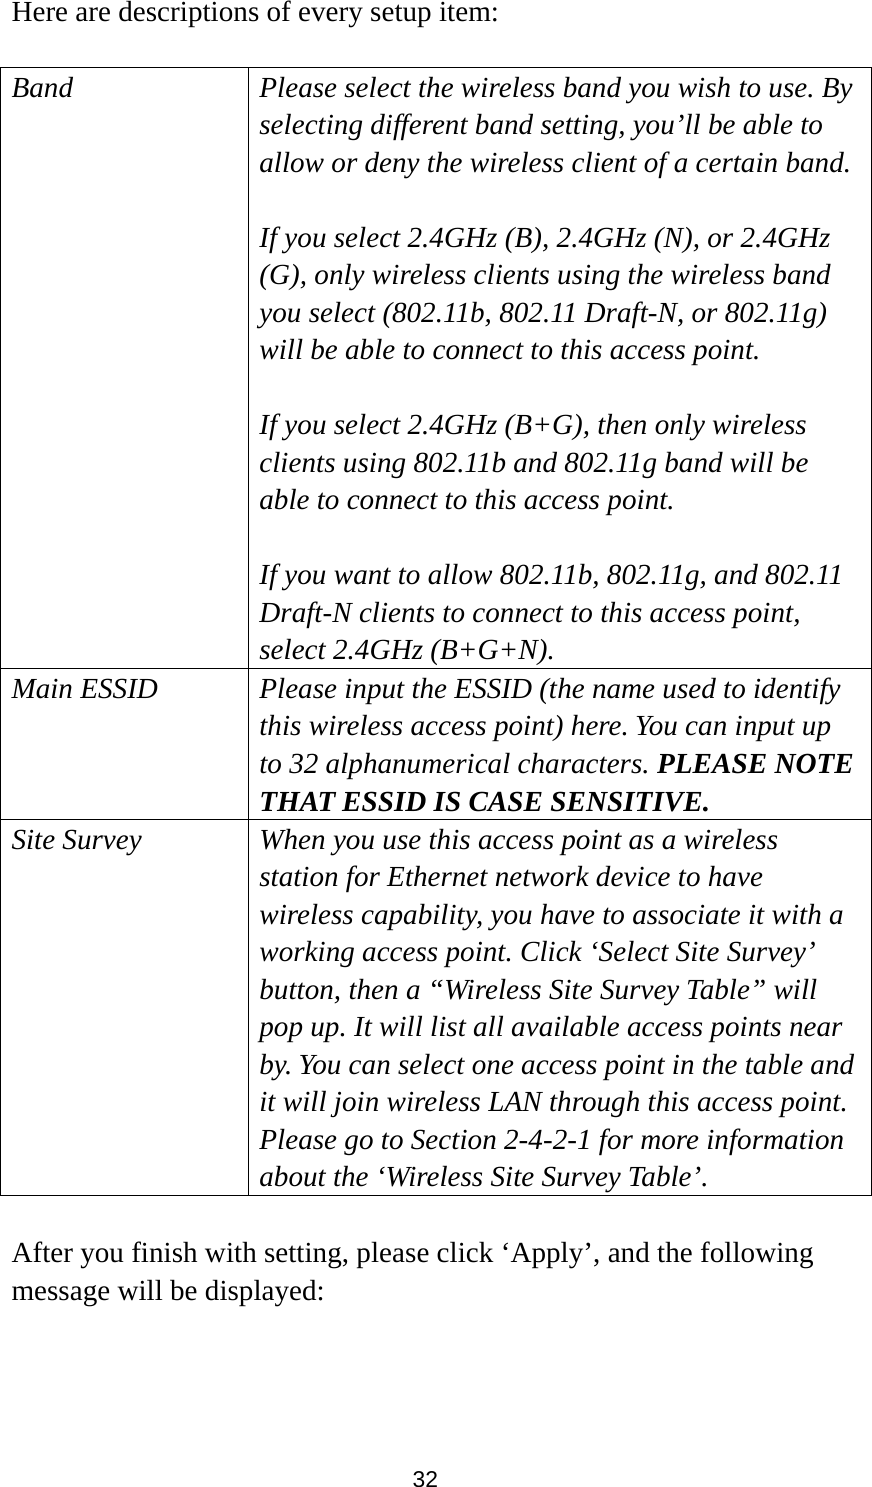 32 Here are descriptions of every setup item:  Band Please select the wireless band you wish to use. By selecting different band setting, you’ll be able to allow or deny the wireless client of a certain band.  If you select 2.4GHz (B), 2.4GHz (N), or 2.4GHz (G), only wireless clients using the wireless band you select (802.11b, 802.11 Draft-N, or 802.11g) will be able to connect to this access point.  If you select 2.4GHz (B+G), then only wireless clients using 802.11b and 802.11g band will be able to connect to this access point.    If you want to allow 802.11b, 802.11g, and 802.11 Draft-N clients to connect to this access point, select 2.4GHz (B+G+N). Main ESSID Please input the ESSID (the name used to identify this wireless access point) here. You can input up to 32 alphanumerical characters. PLEASE NOTE   THAT ESSID IS CASE SENSITIVE. Site Survey When you use this access point as a wireless station for Ethernet network device to have wireless capability, you have to associate it with a working access point. Click ‘Select Site Survey’ button, then a “Wireless Site Survey Table” will pop up. It will list all available access points near by. You can select one access point in the table and it will join wireless LAN through this access point. Please go to Section 2-4-2-1 for more information about the ‘Wireless Site Survey Table’.  After you finish with setting, please click ‘Apply’, and the following message will be displayed:  